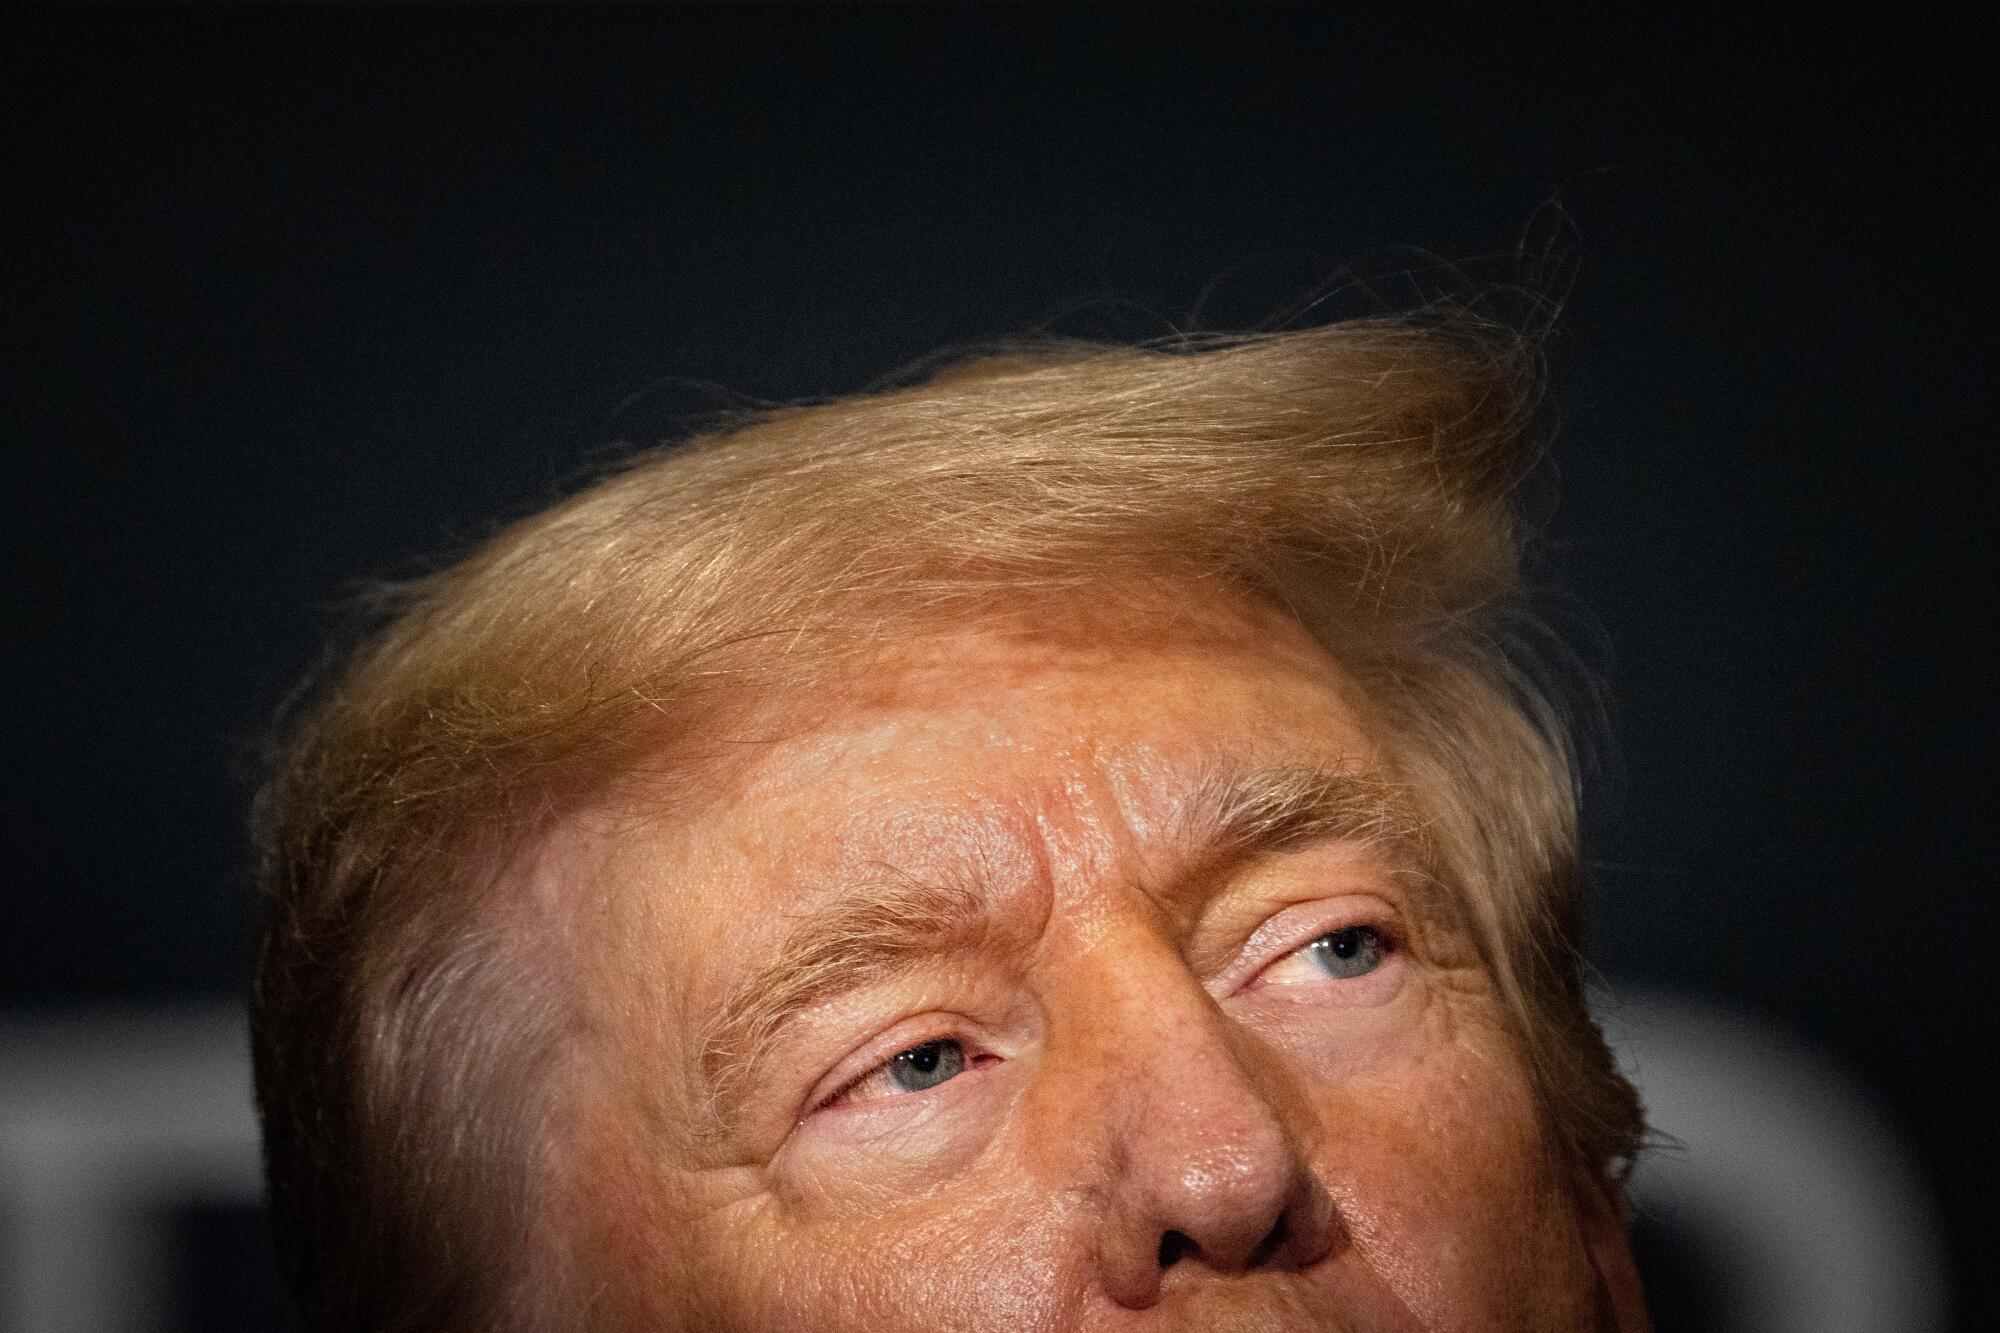 A close-up of Donald Trump's face, framed nose and up.